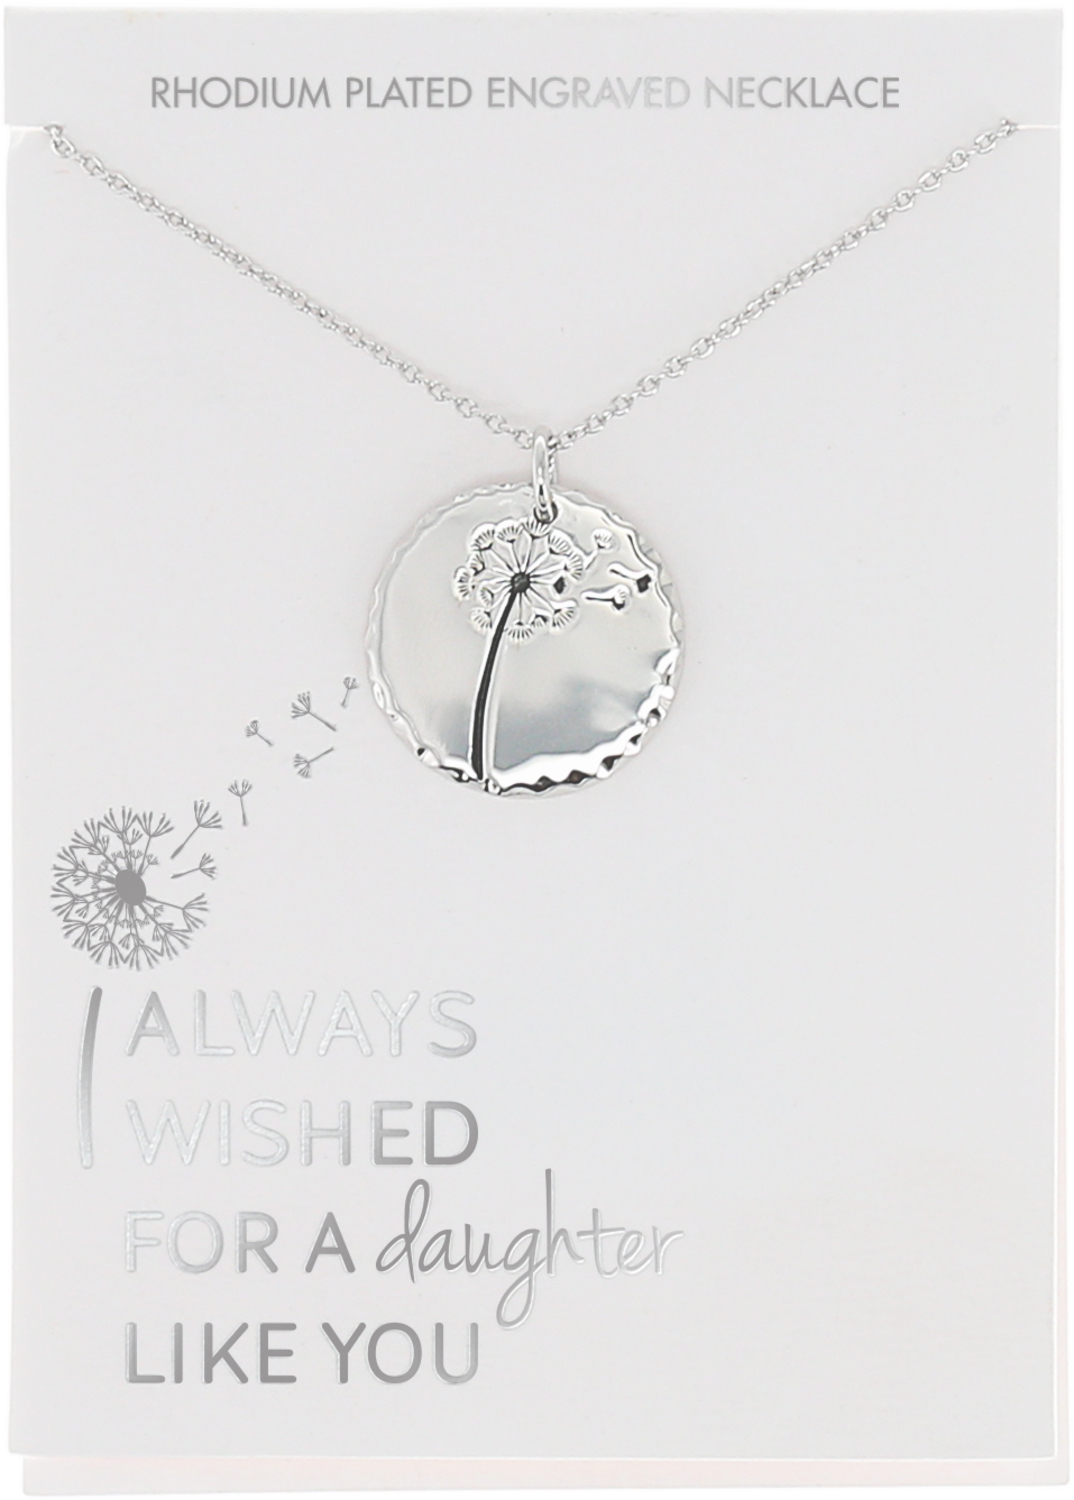 Daughter by I Always Wished - Daughter - 16.5"-18.5" Engraved Rhodium Plated  Necklace